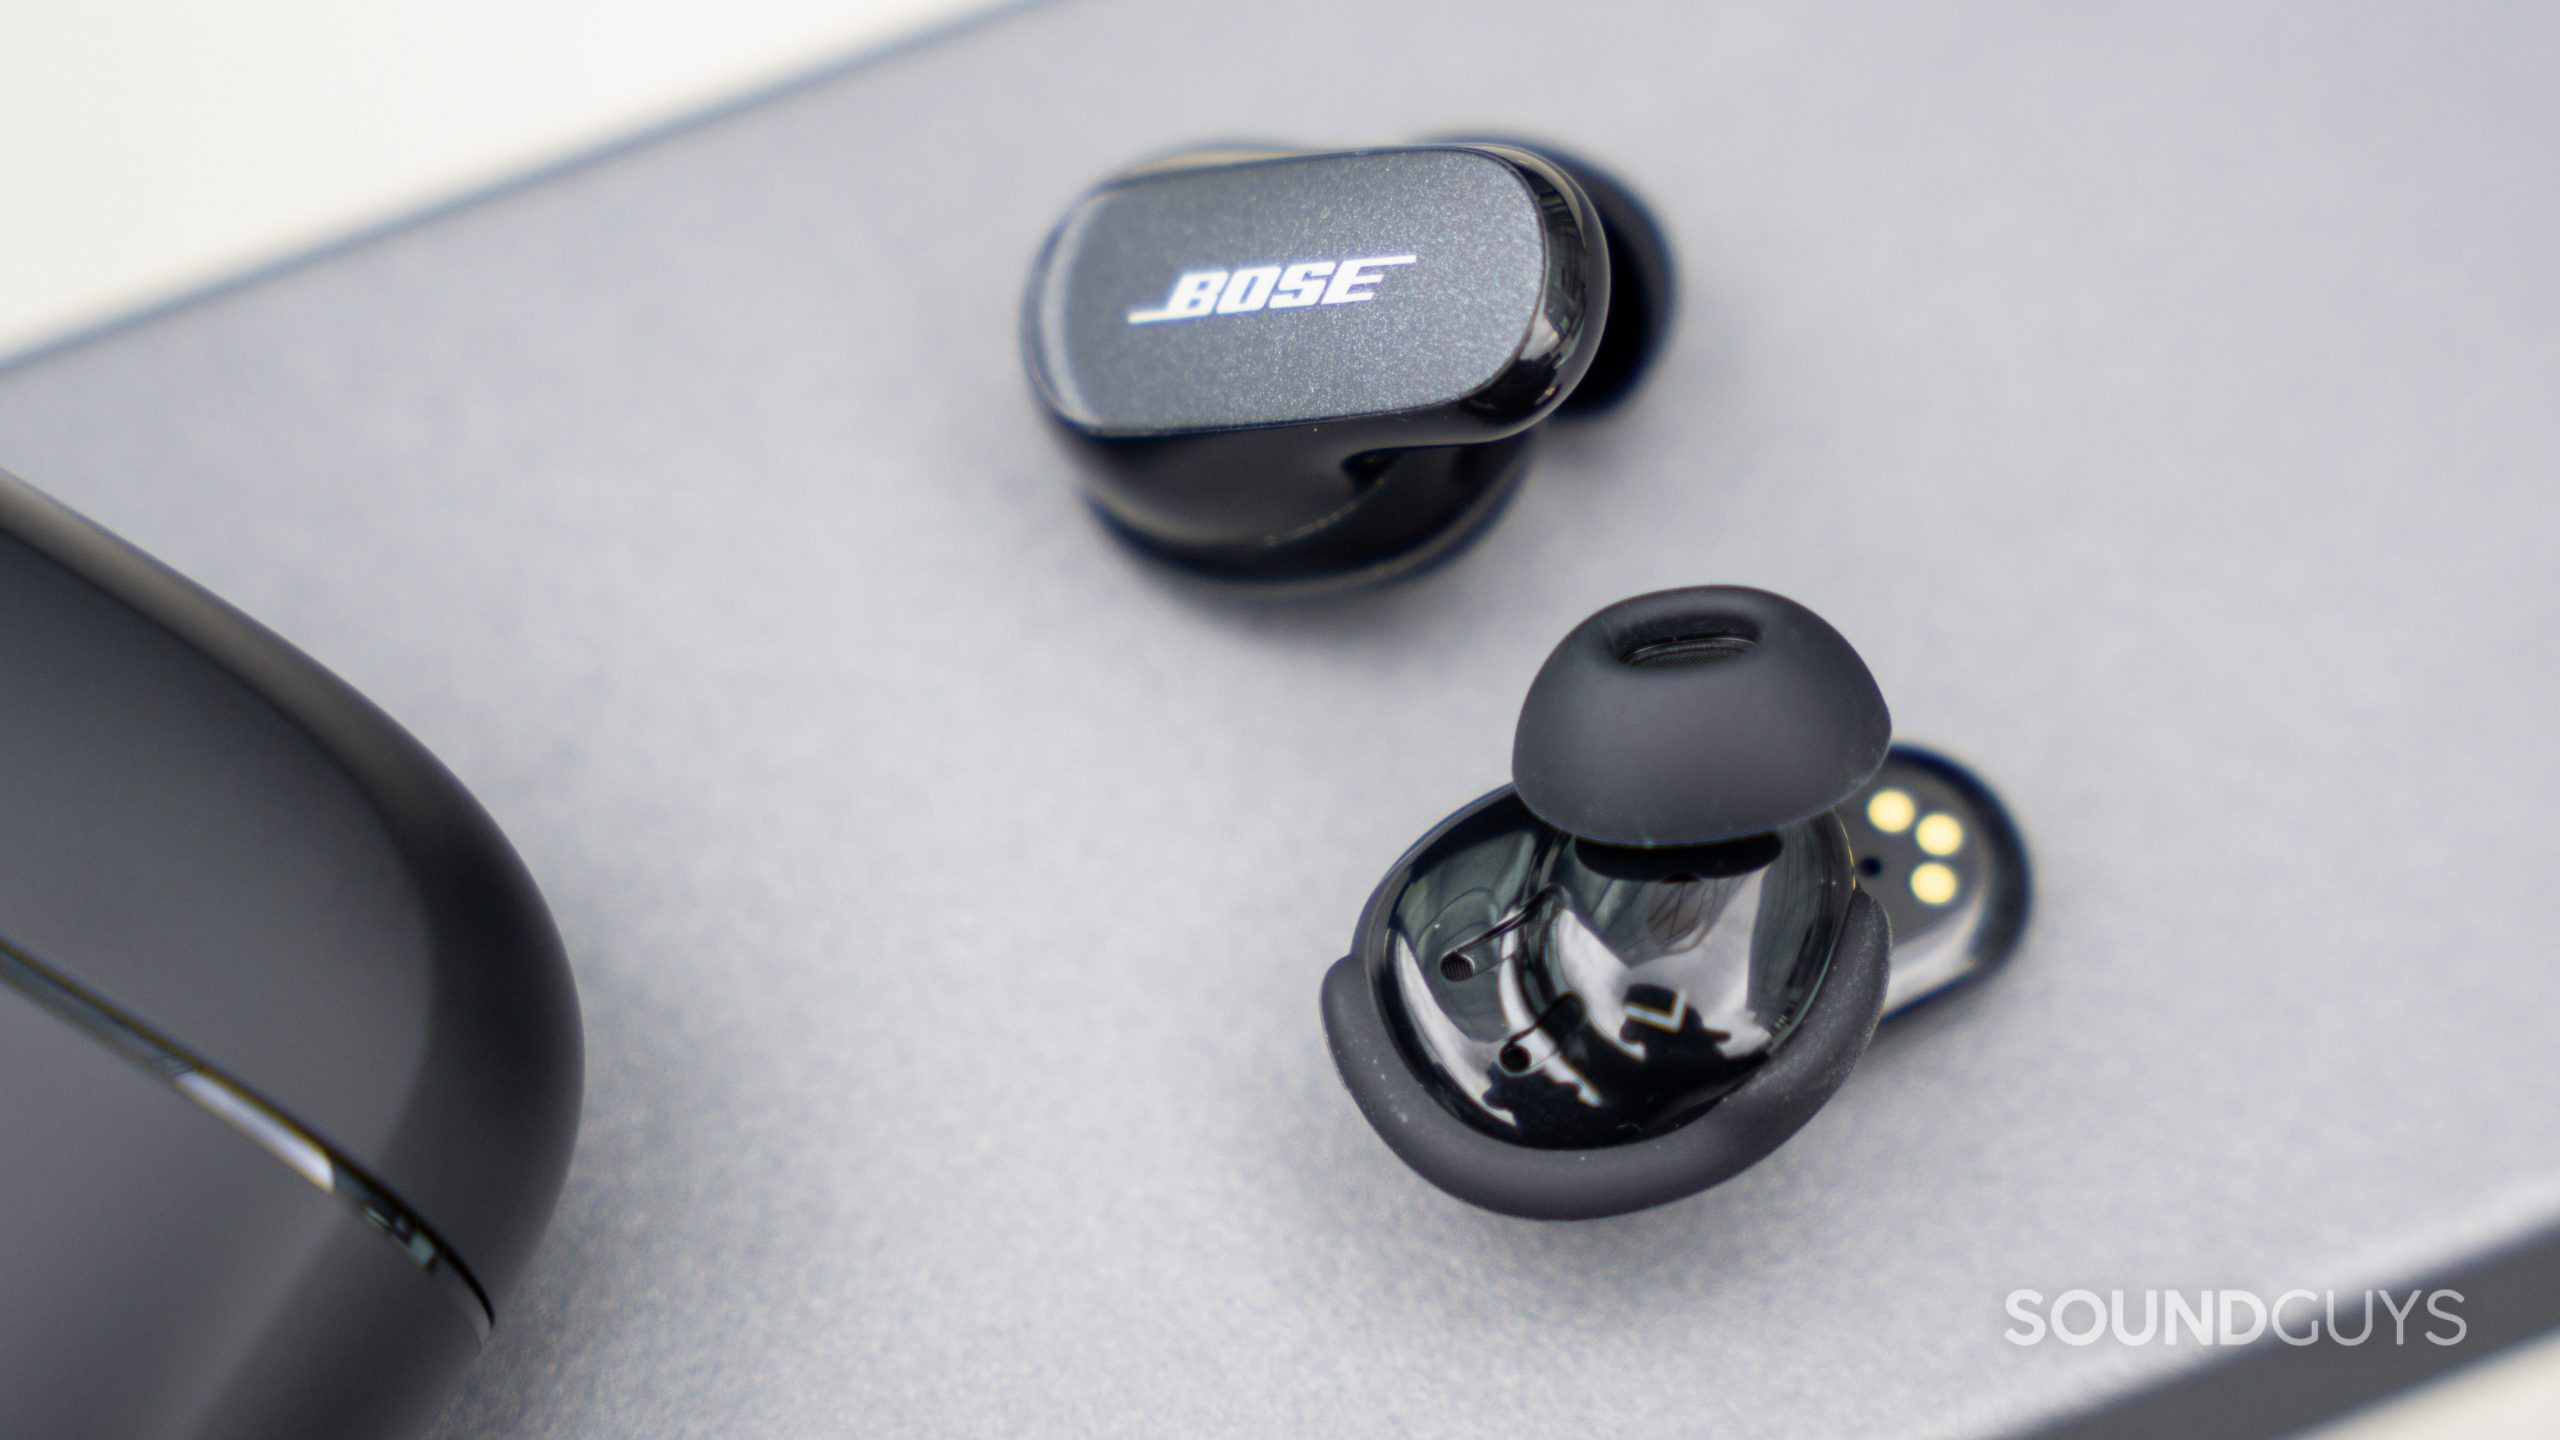 The Bose QuietComfort Earbuds II with the concha ear wings and oblong ear tips.